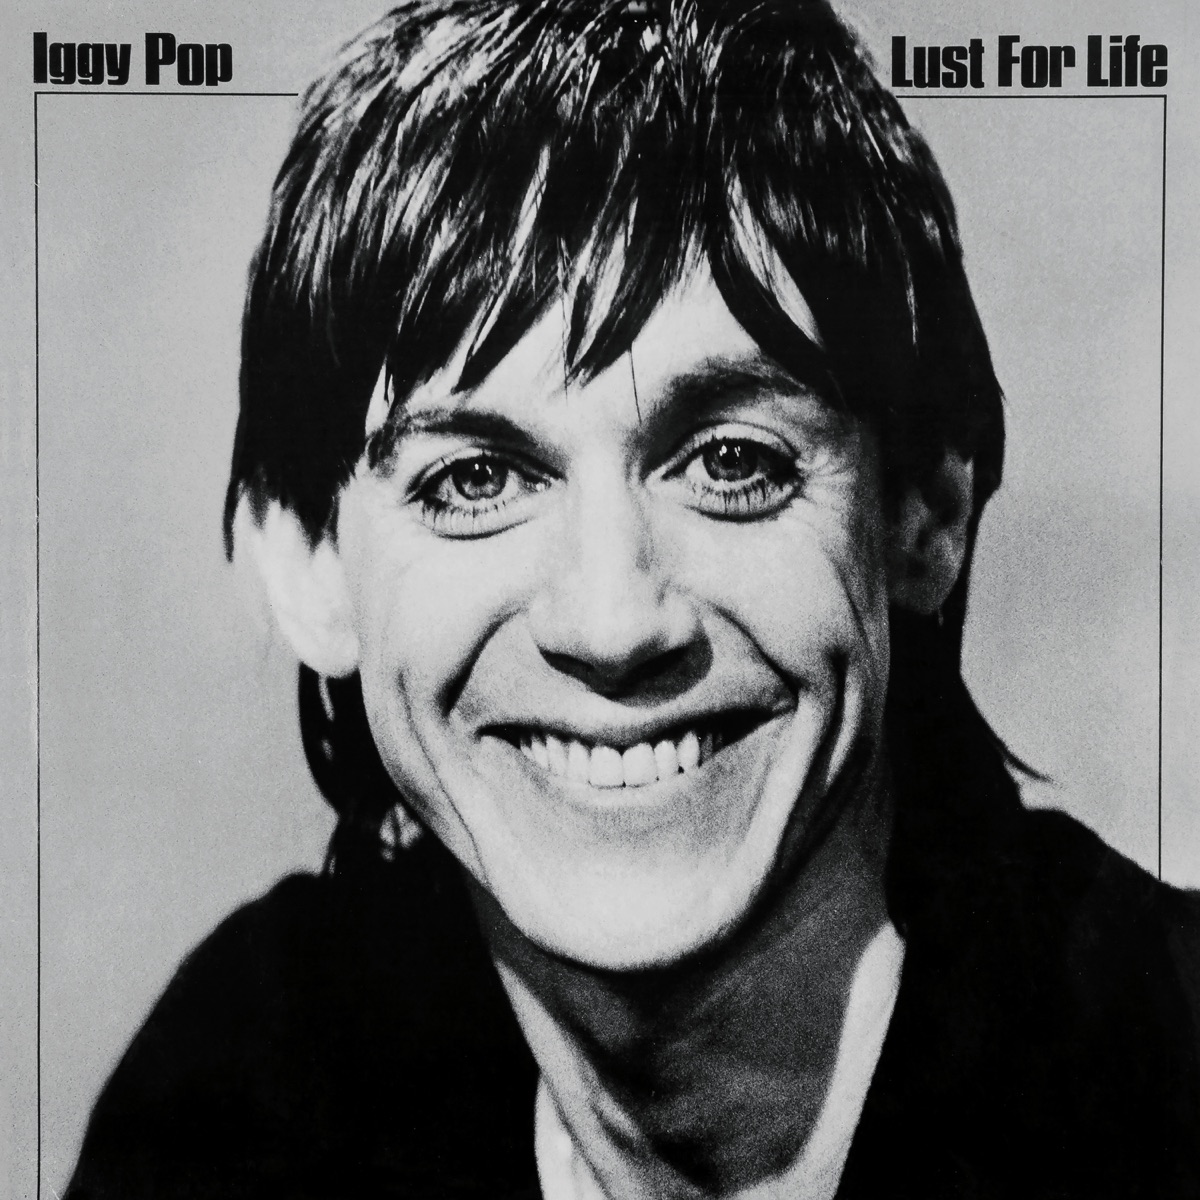 Lust For Life (Deluxe Edition) - Album by Iggy Pop - Apple Music